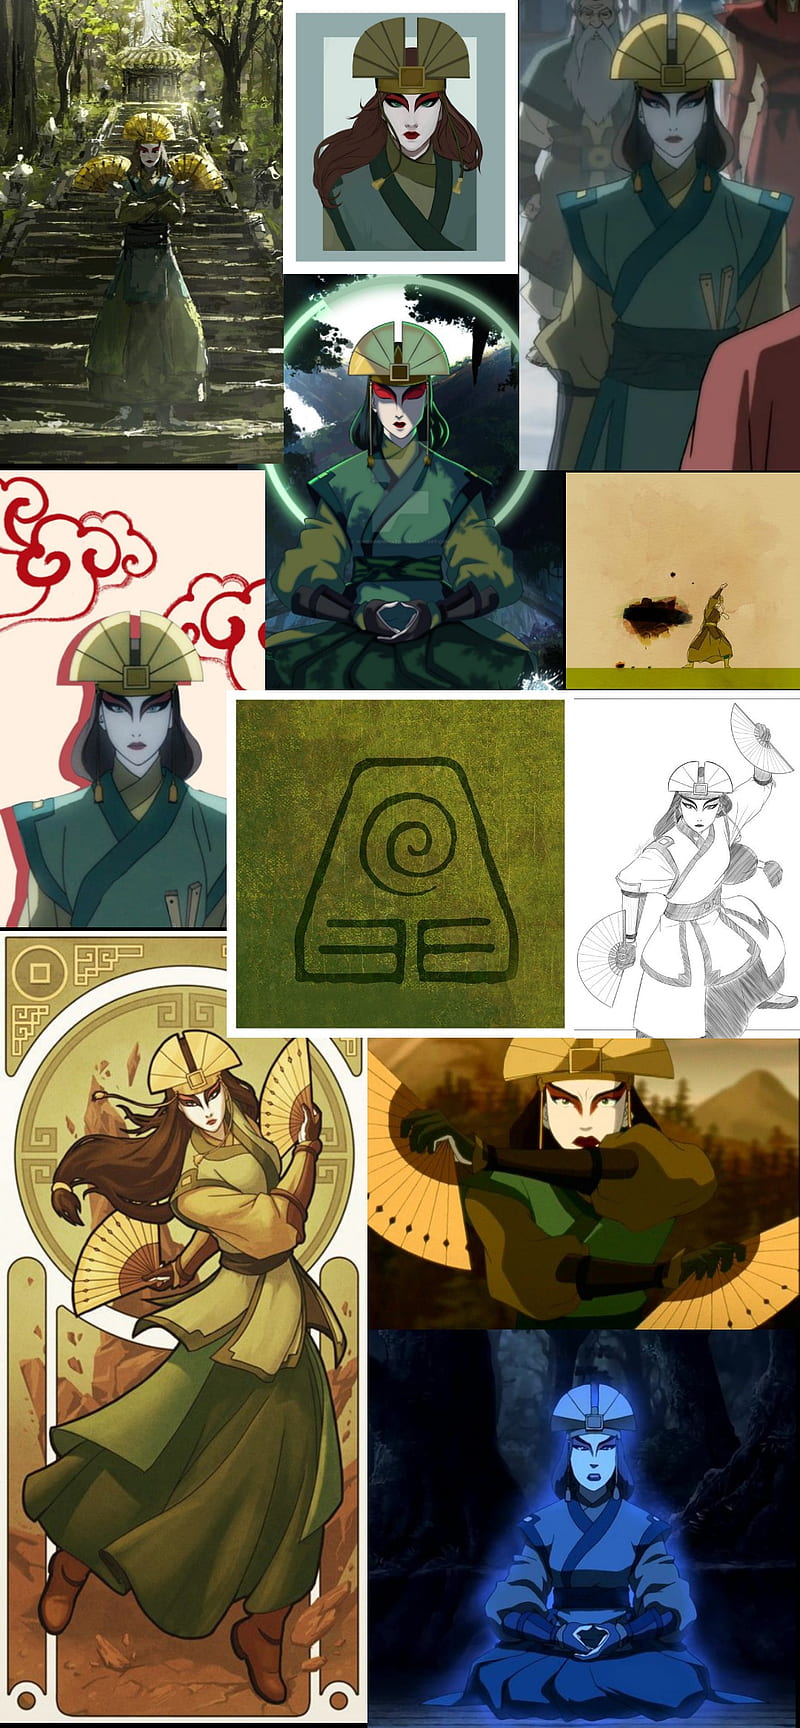 LEAKRUMOR Characters from the Avatar Kyoshi novel including Kyoshi  herself will appear in Avatar Studios 2025 animated movie or the 2025  earth Avatar animated show  rTheLastAirbender